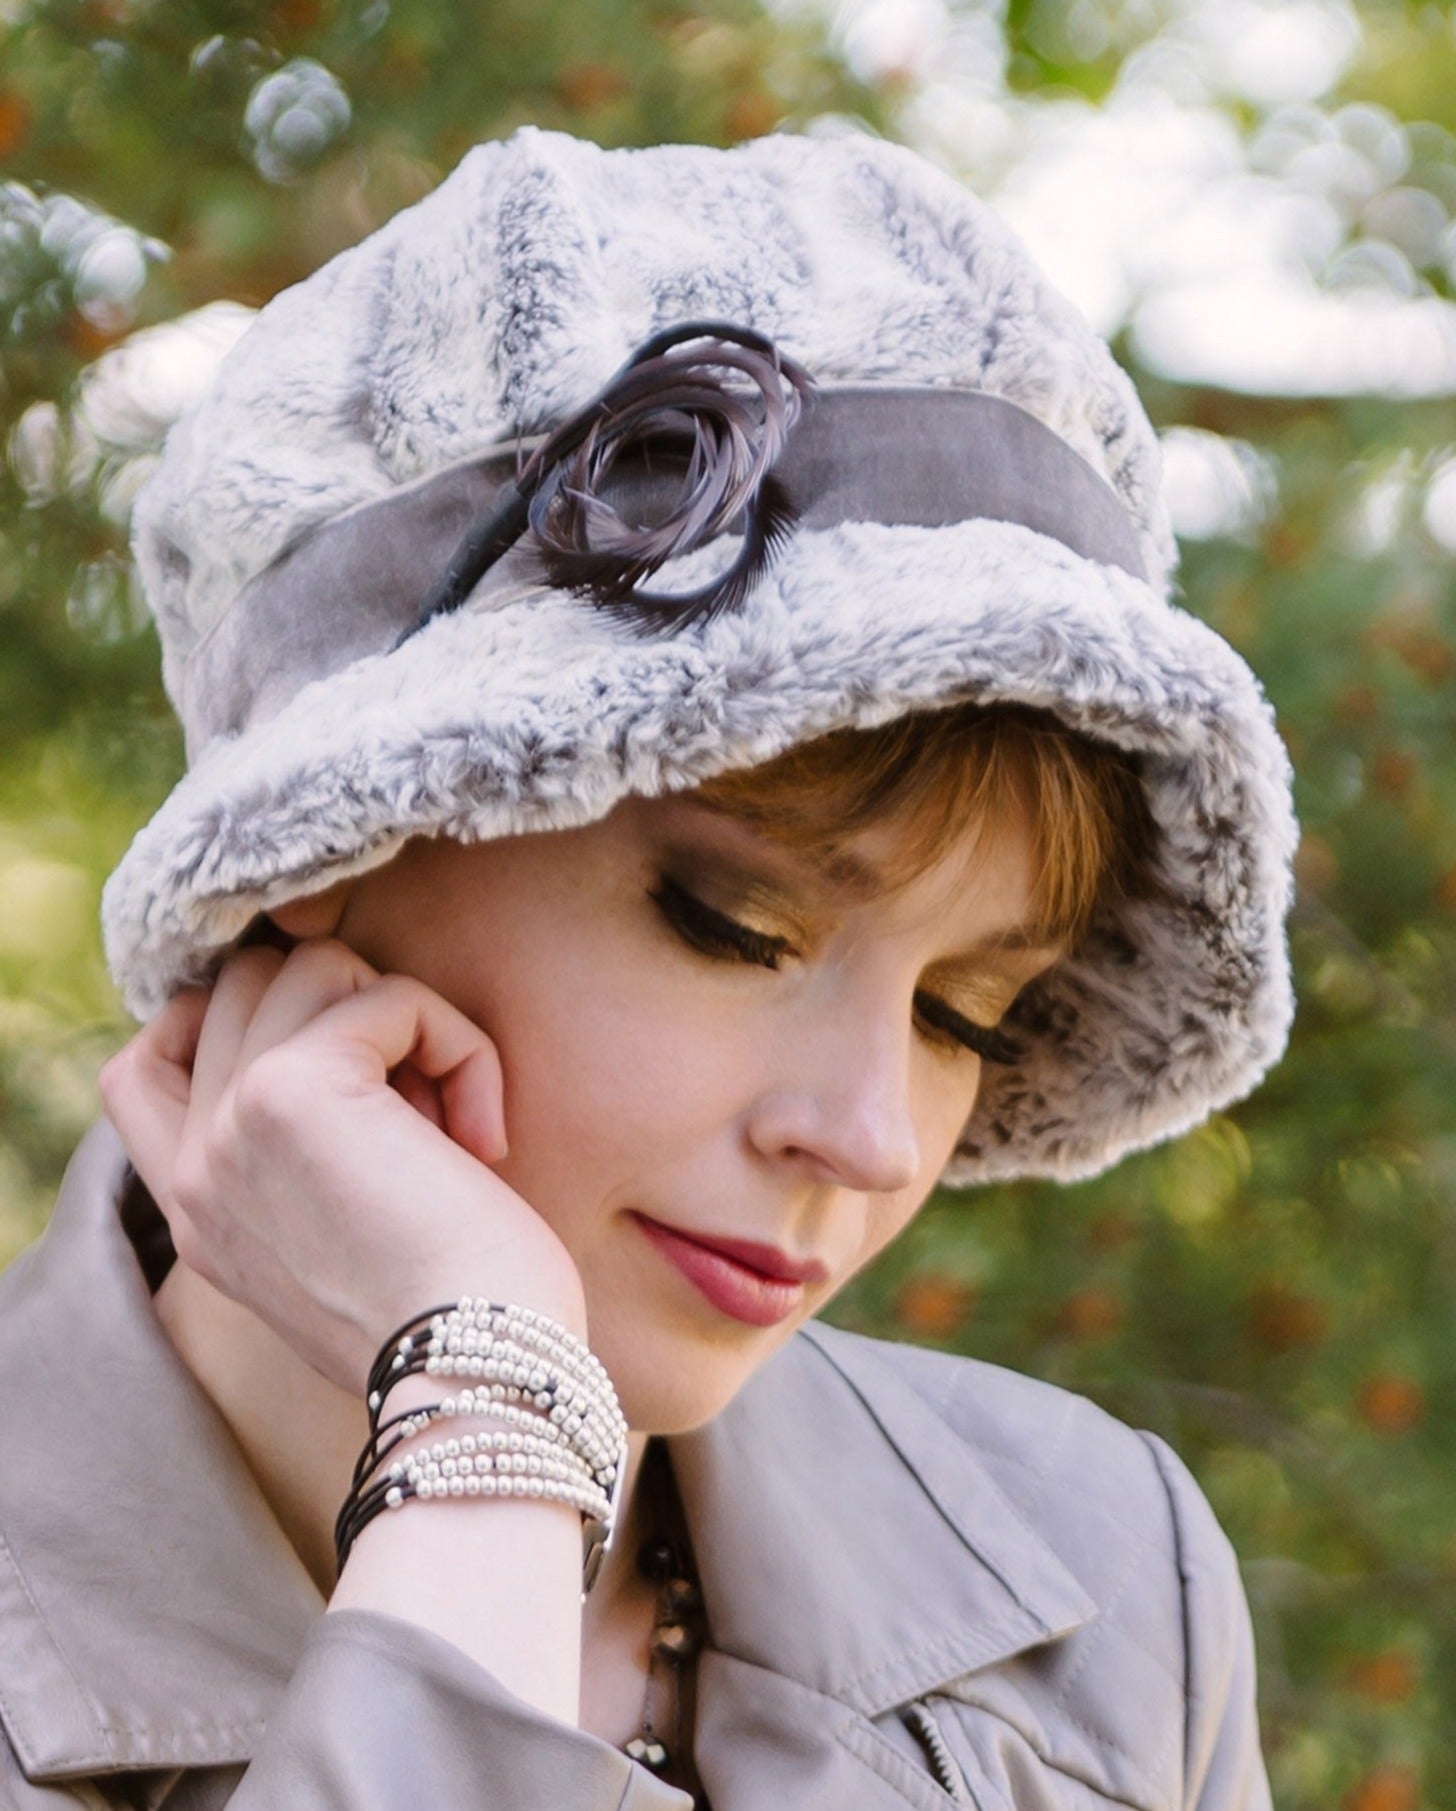 Grace Hat in Khaki Faux Fur shown on Model features Midori Velvet Band with Curl Gray Feather | By Pandemonium Millinery | Seattle WA USA